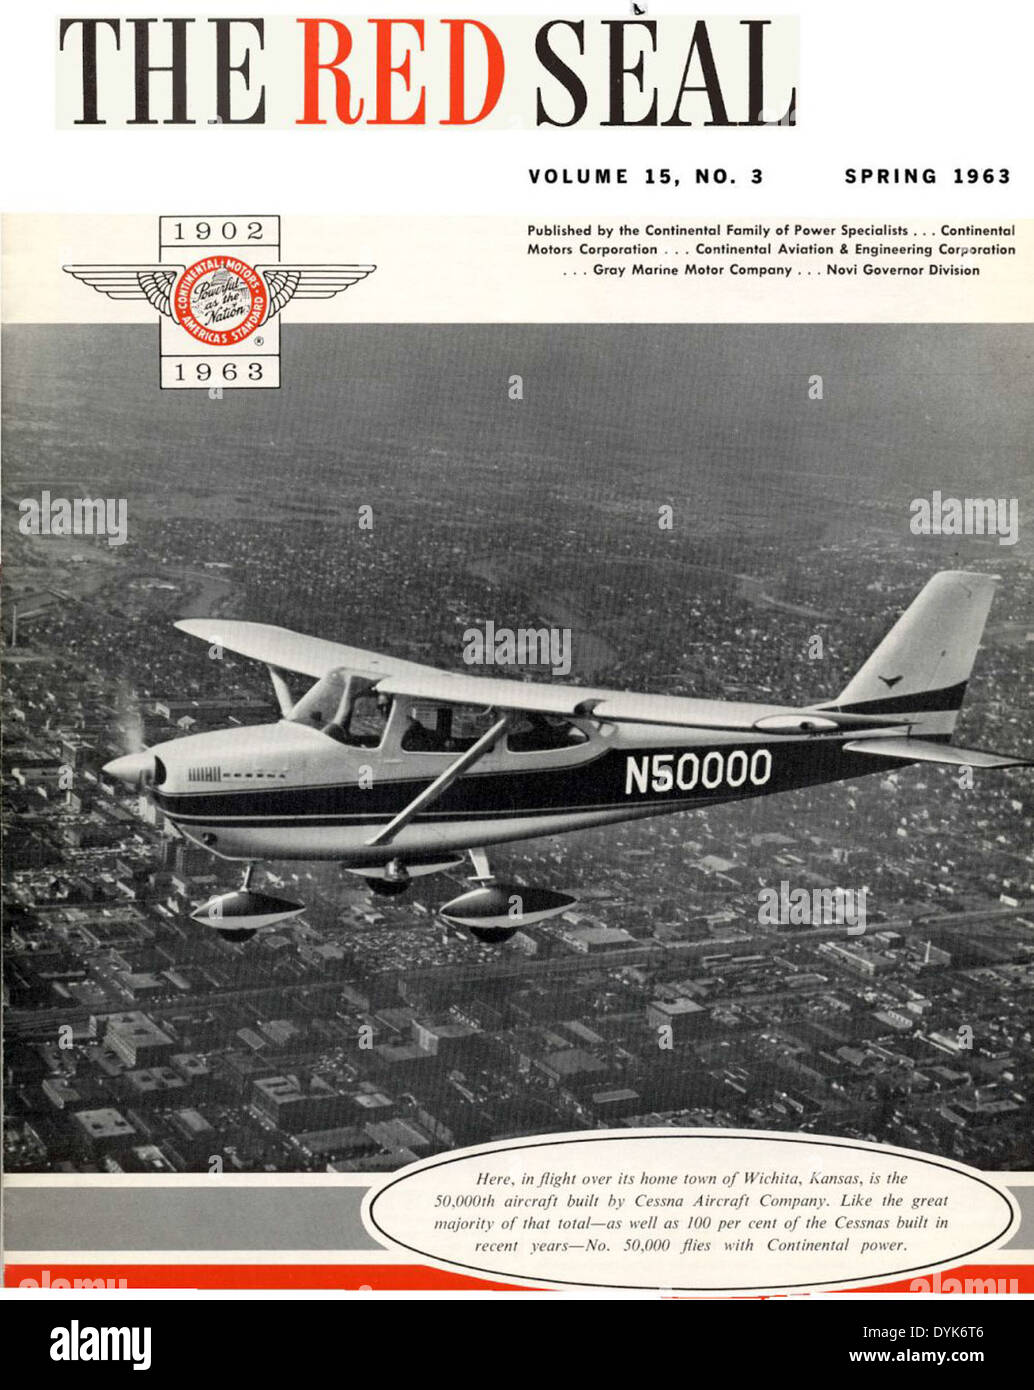 50,000th Airplane The Red Seal Cont Eng Mag Spring 1963 Stock Photo